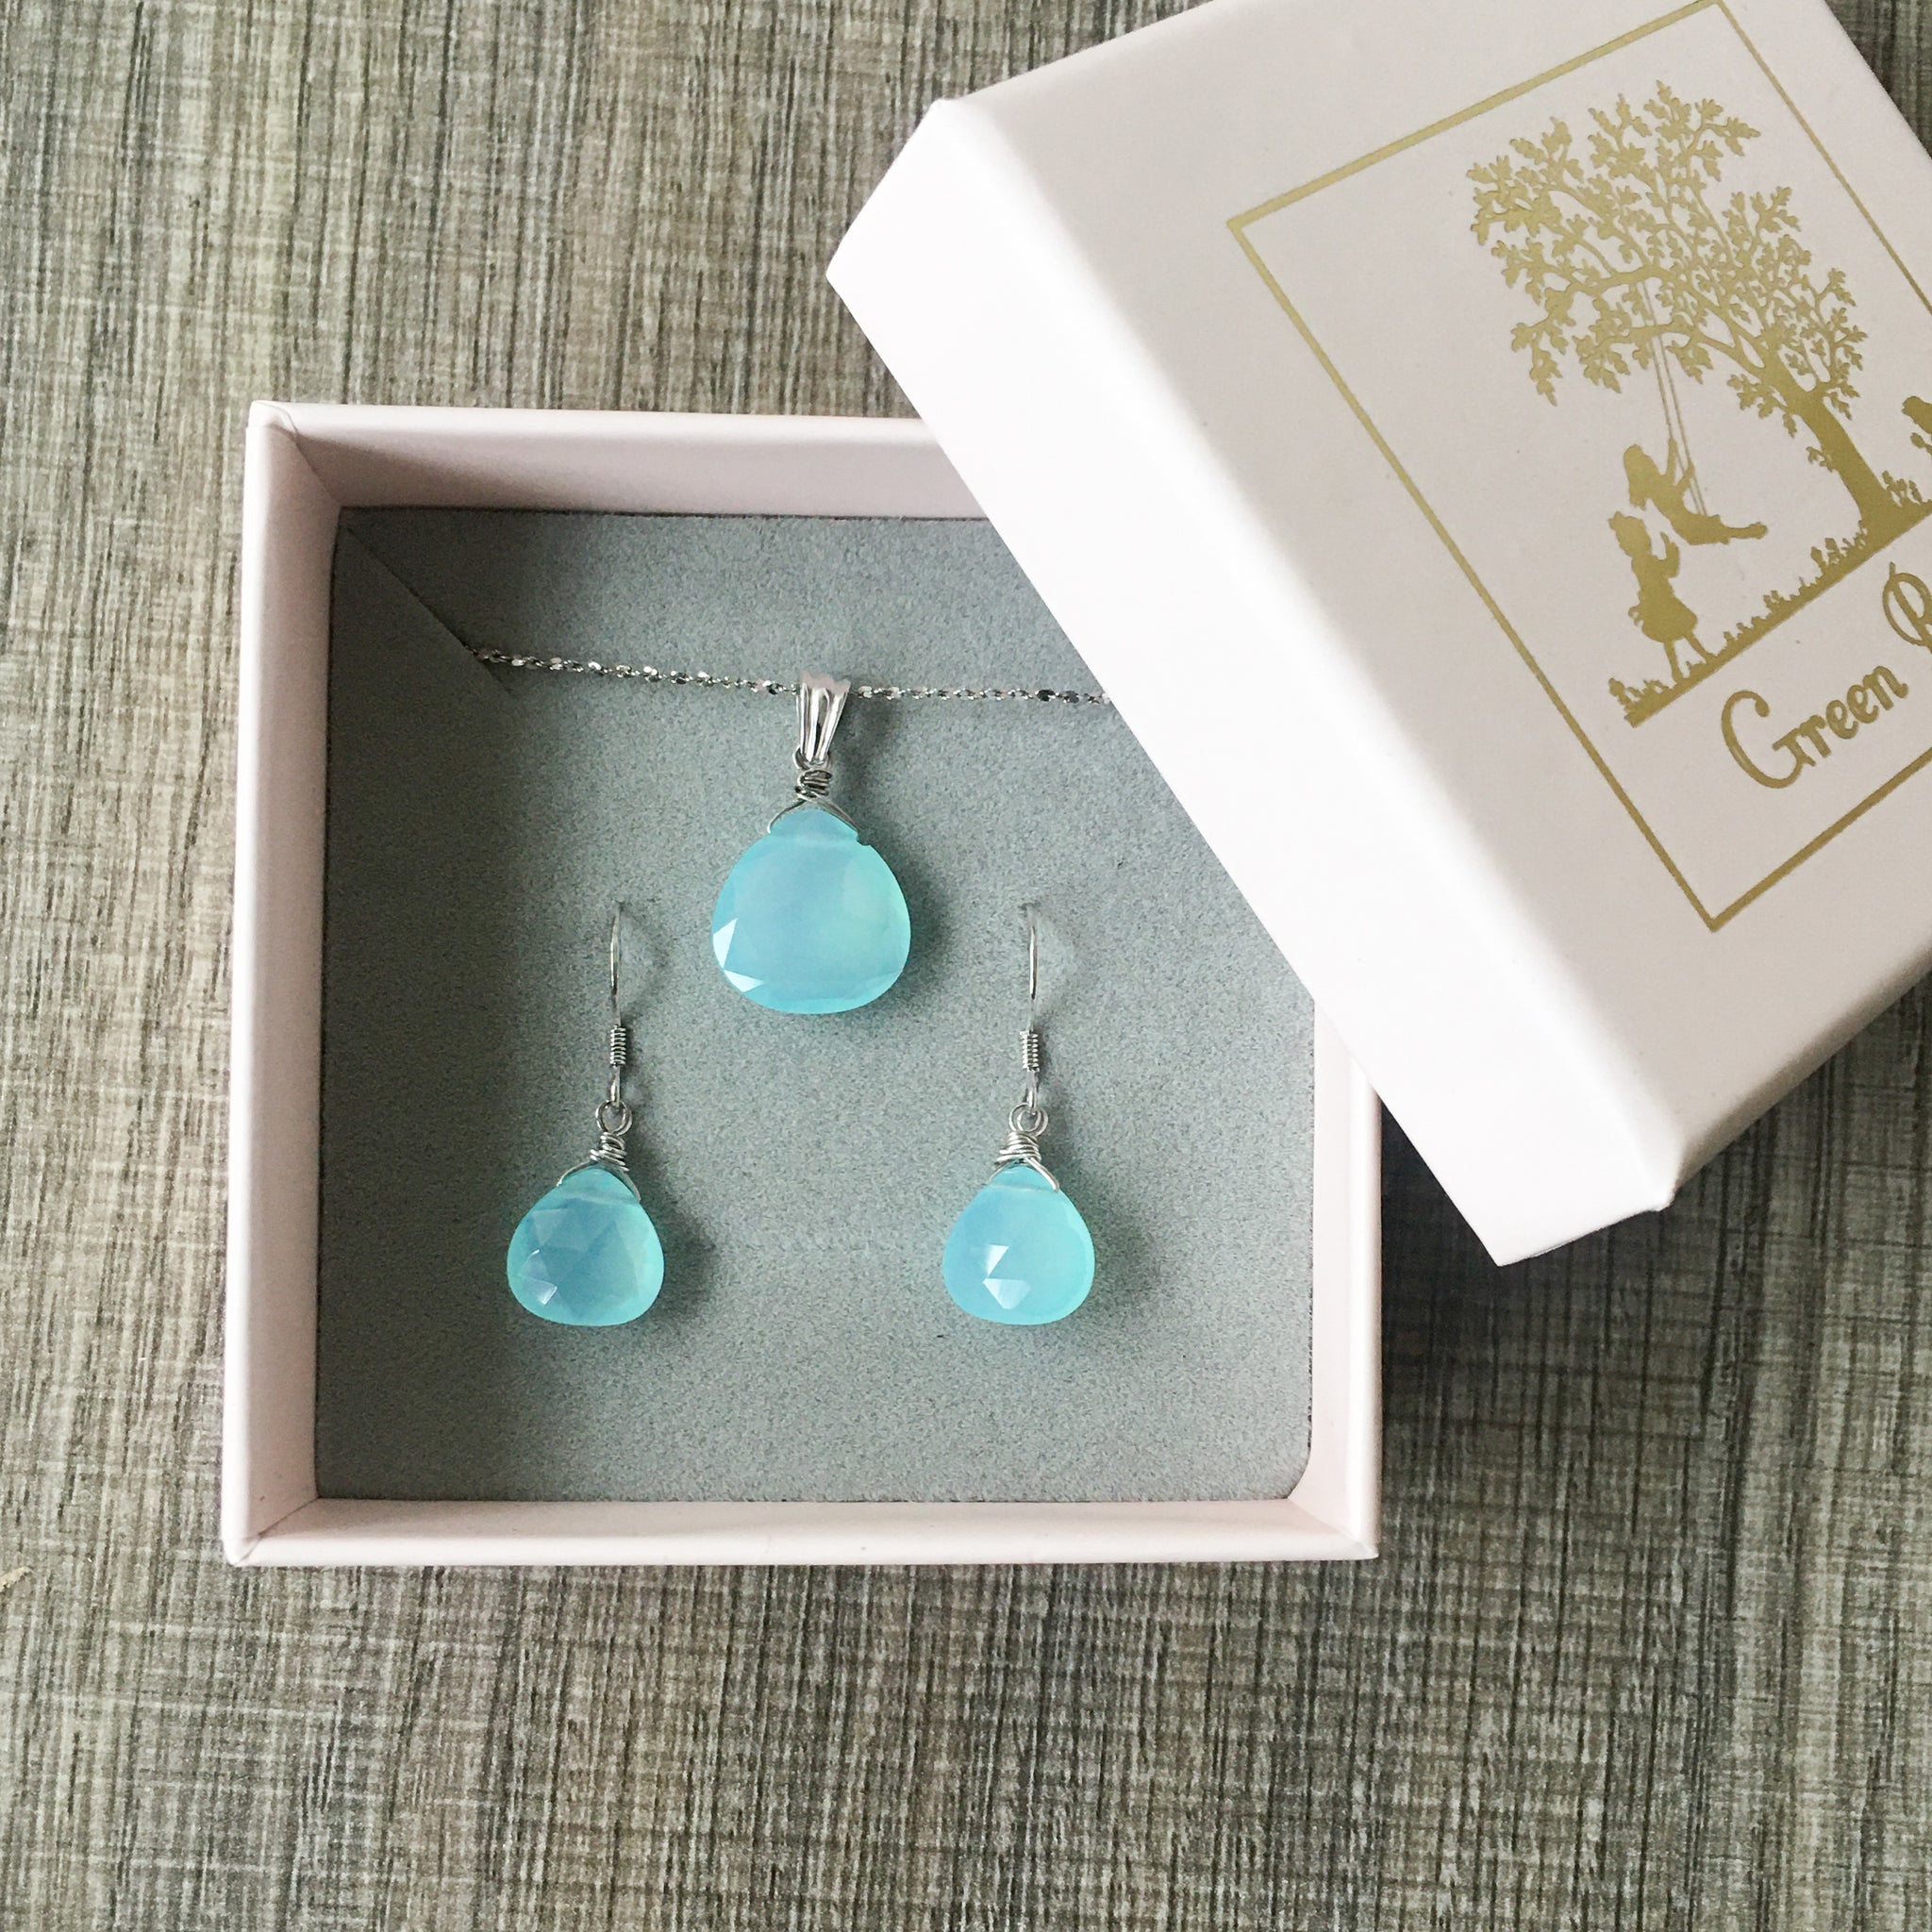 Aquamarine Earrings and Necklace